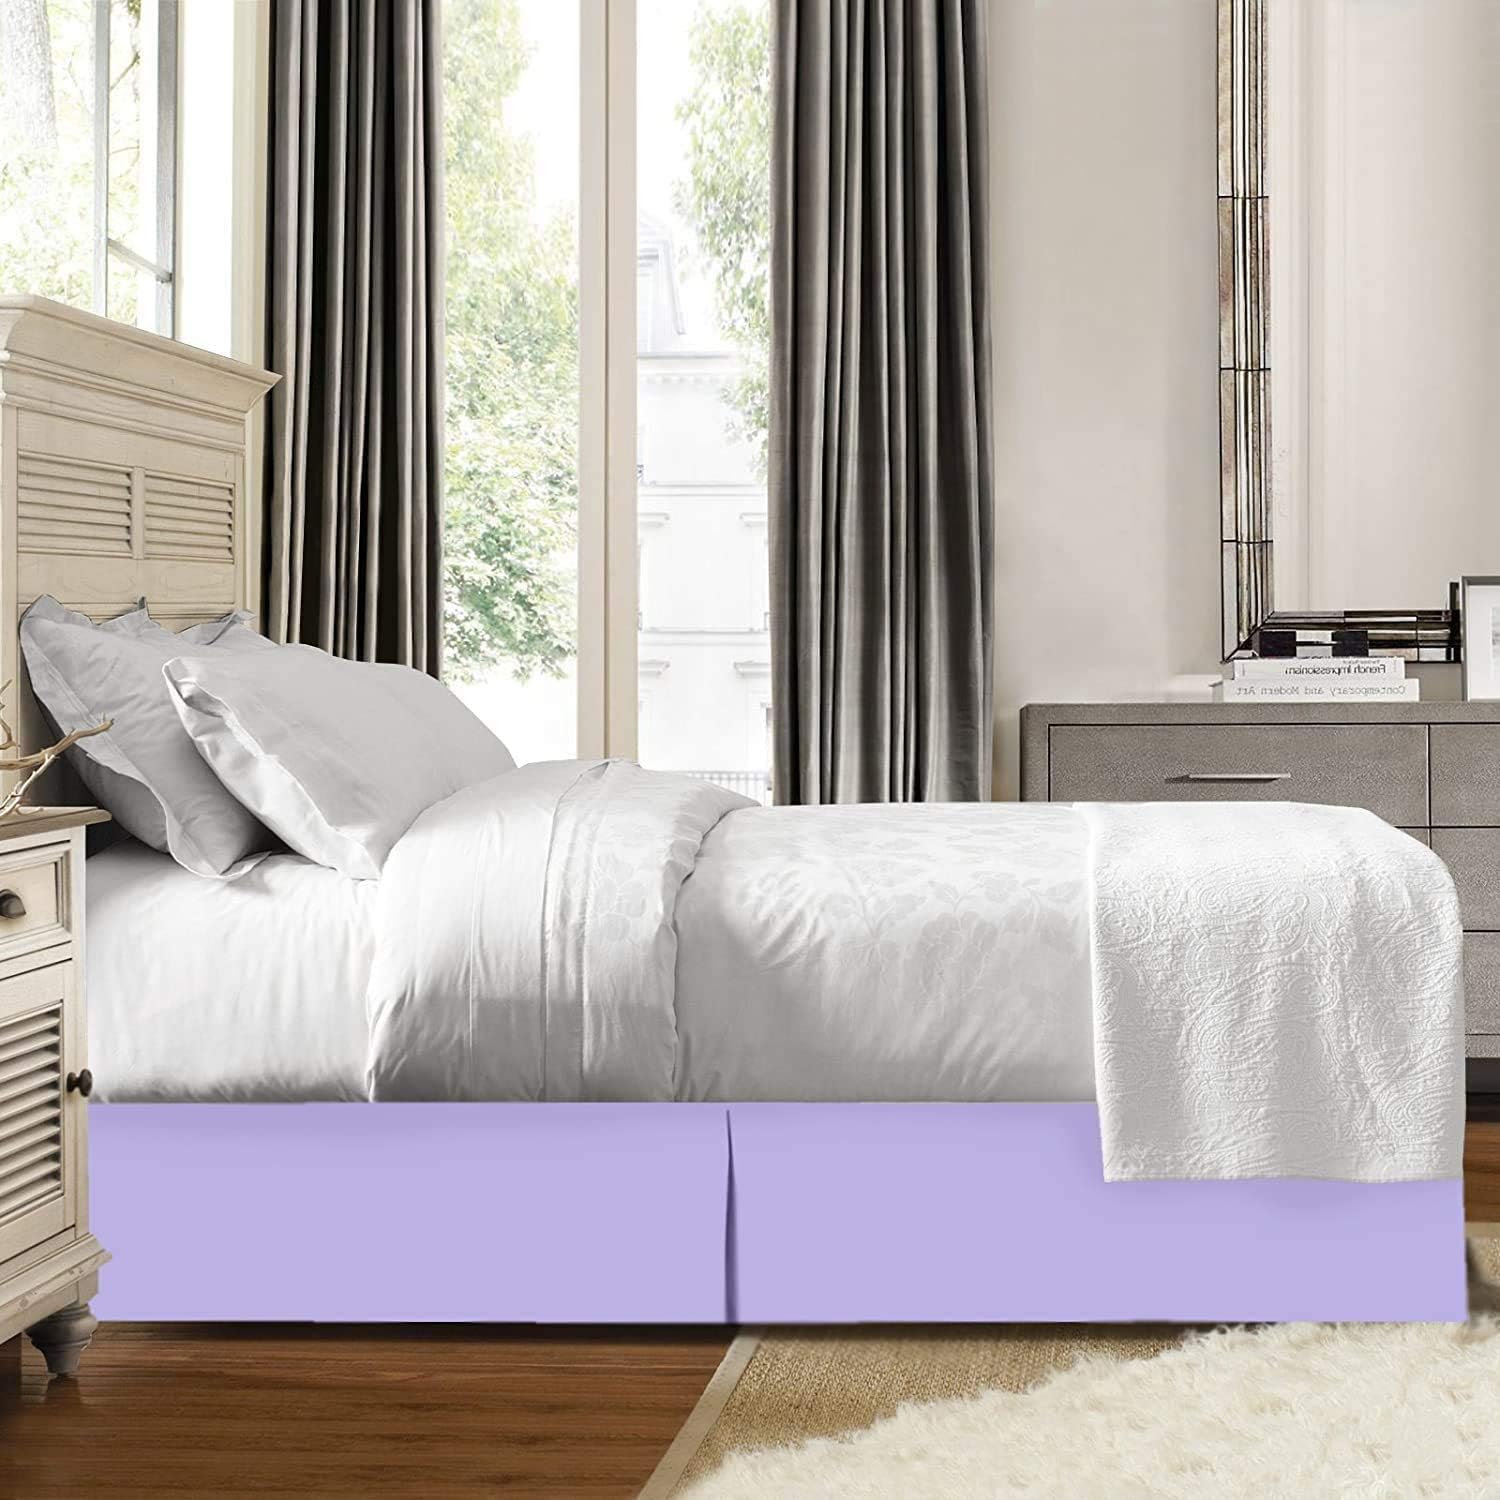 Buy 10 Inch Bed Skirt Lavender Cotton